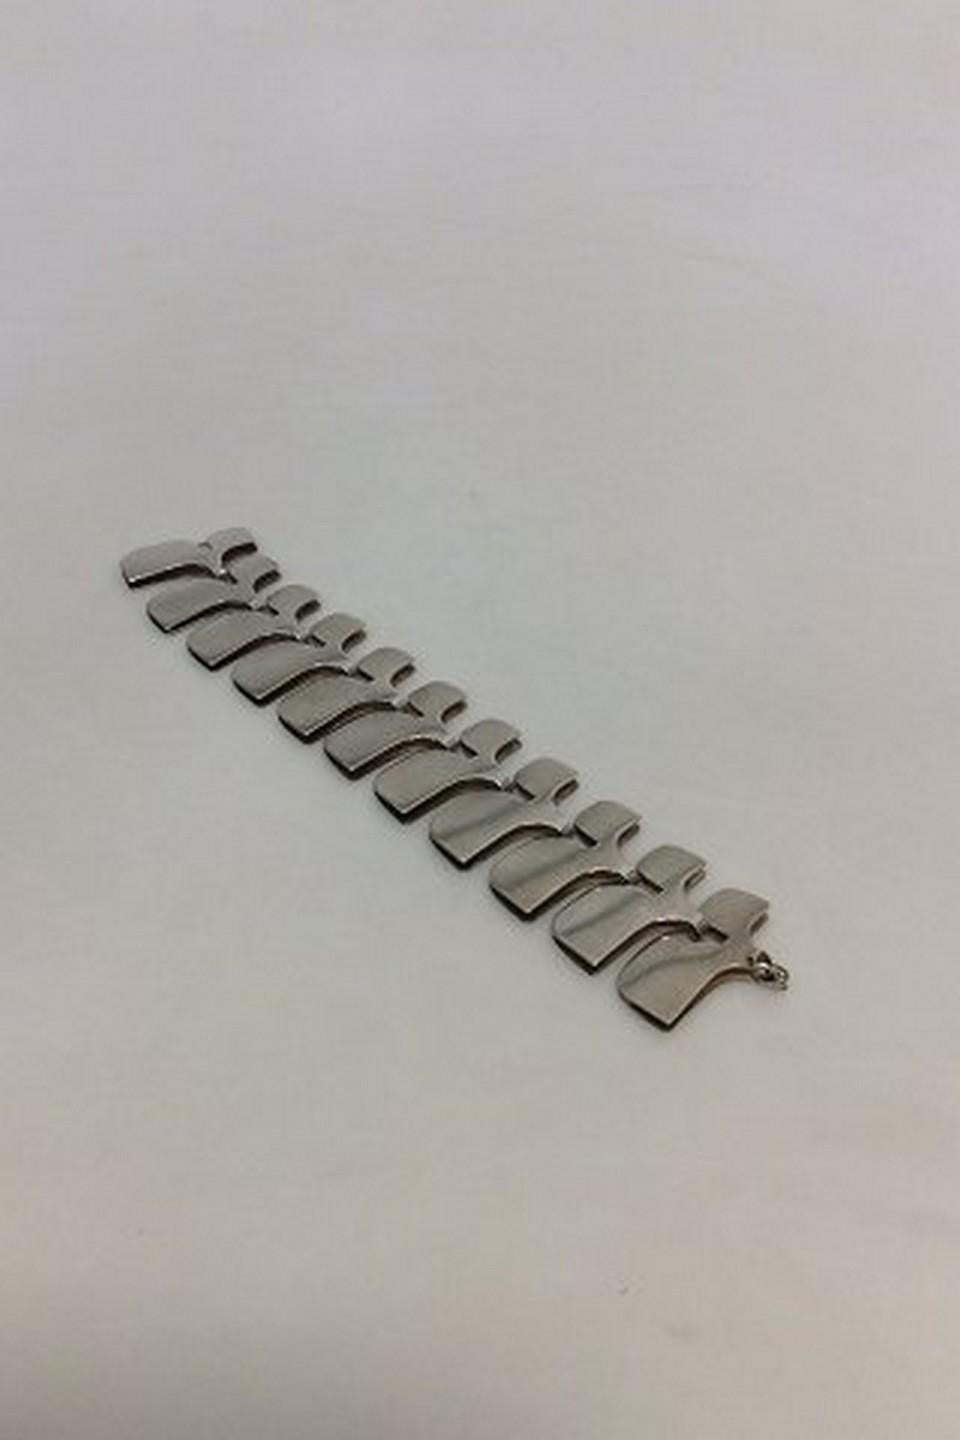 Vintage Georg Jensen Sterling Silver Wide Bracelet by Ibe Dahlquist no 149A.
Measures 21,7cm and 3,9cm wide. (8.54